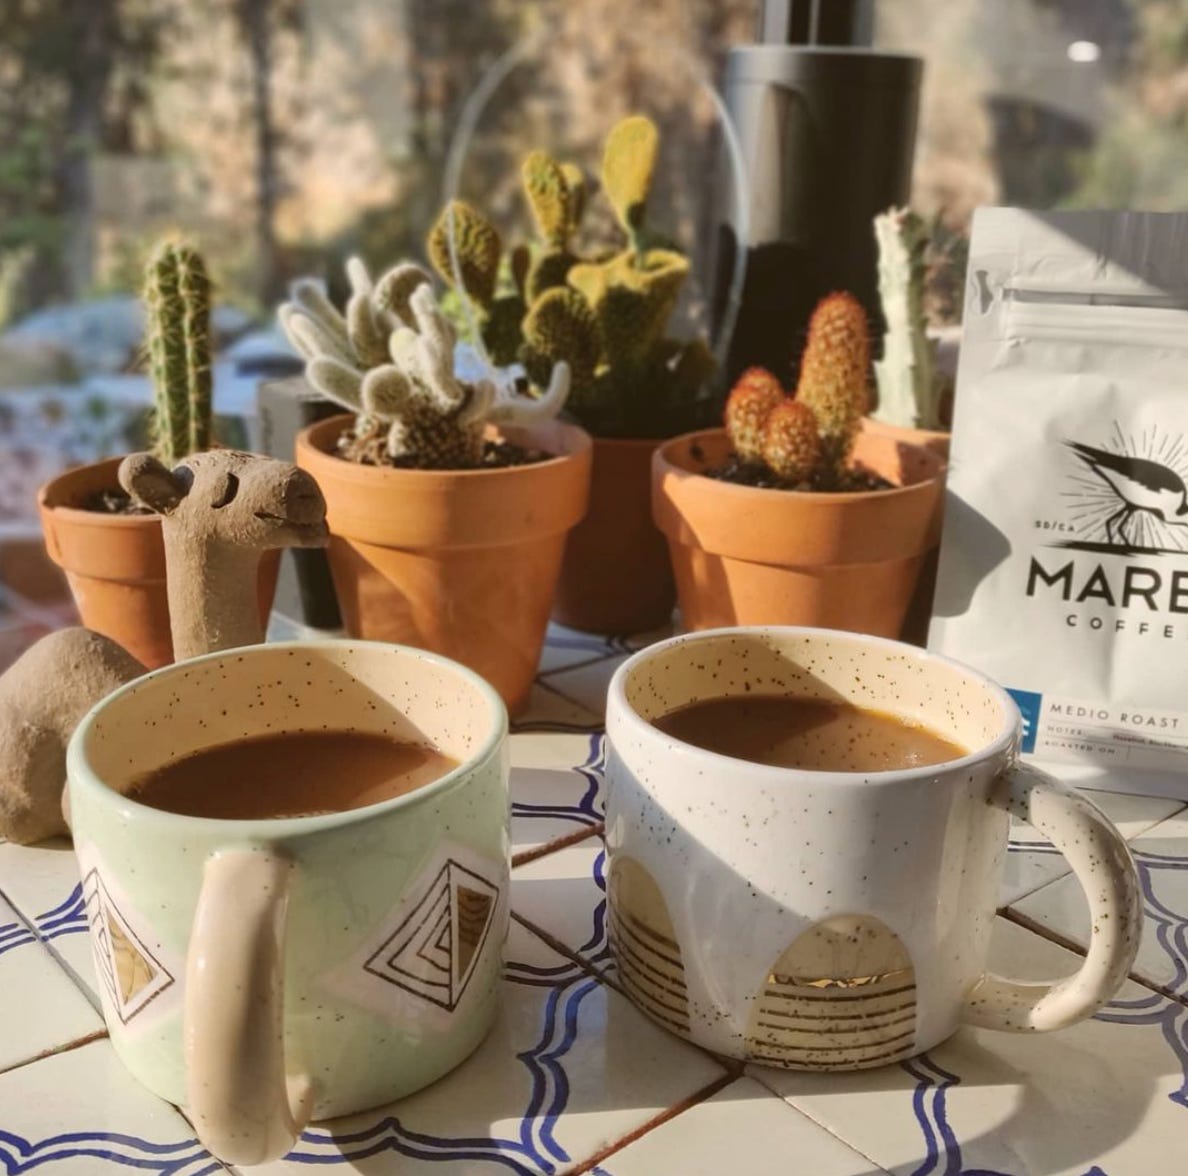 Two clay mugs of coffee on a white tile table outside with red clay pots with succulents and a bag of marea coffee in the background.